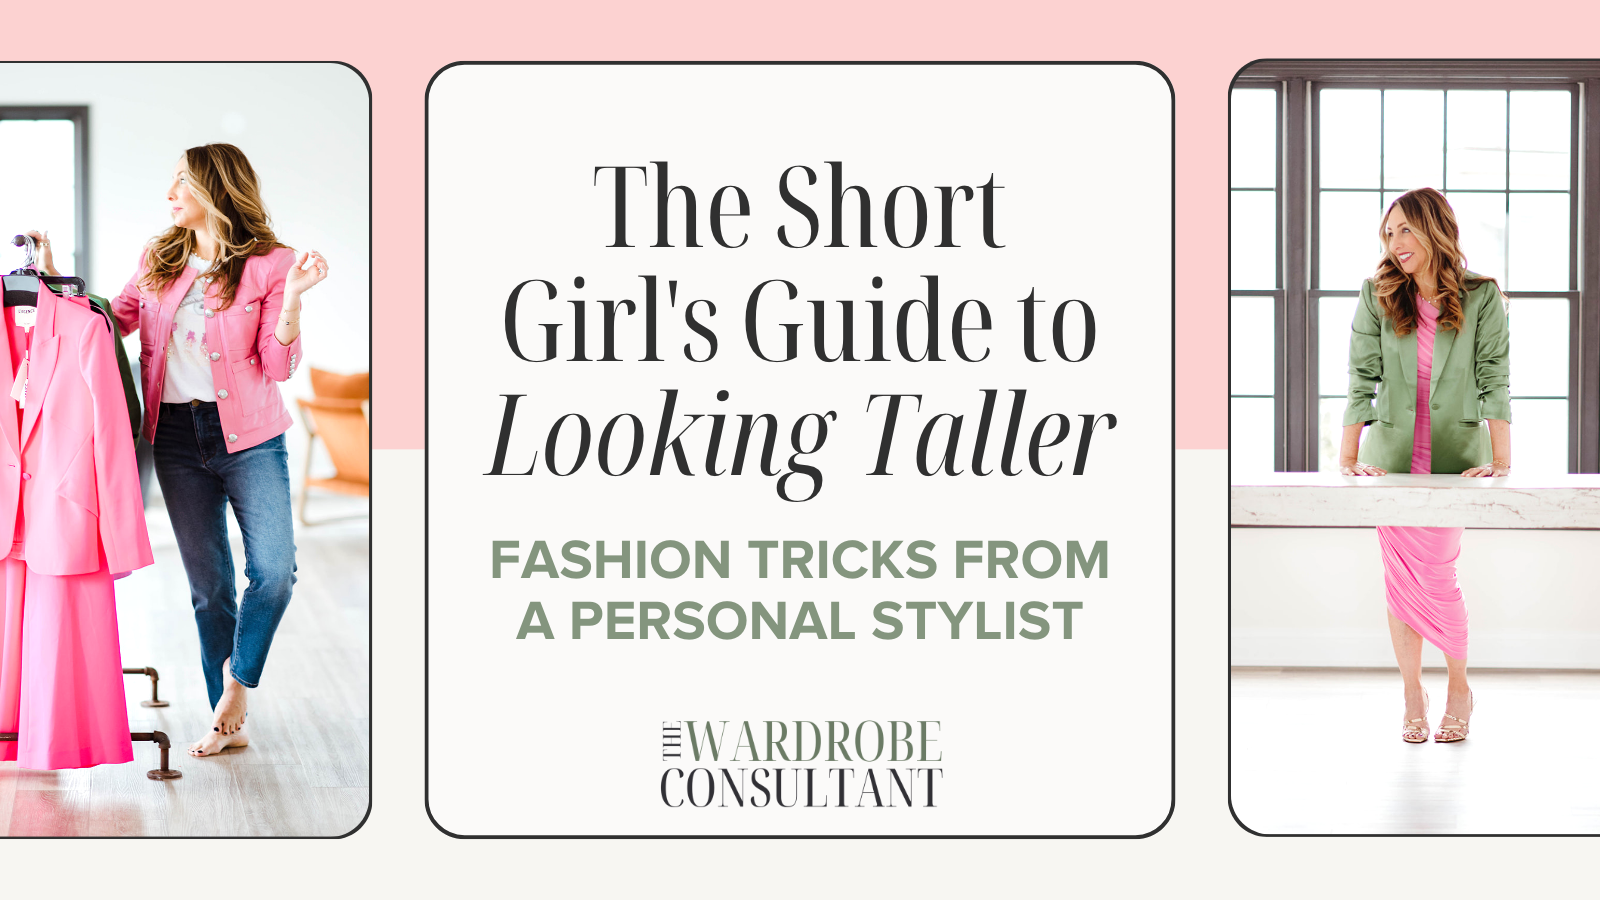 The Pant Guide for Short and Chubby Women - Petite Dressing